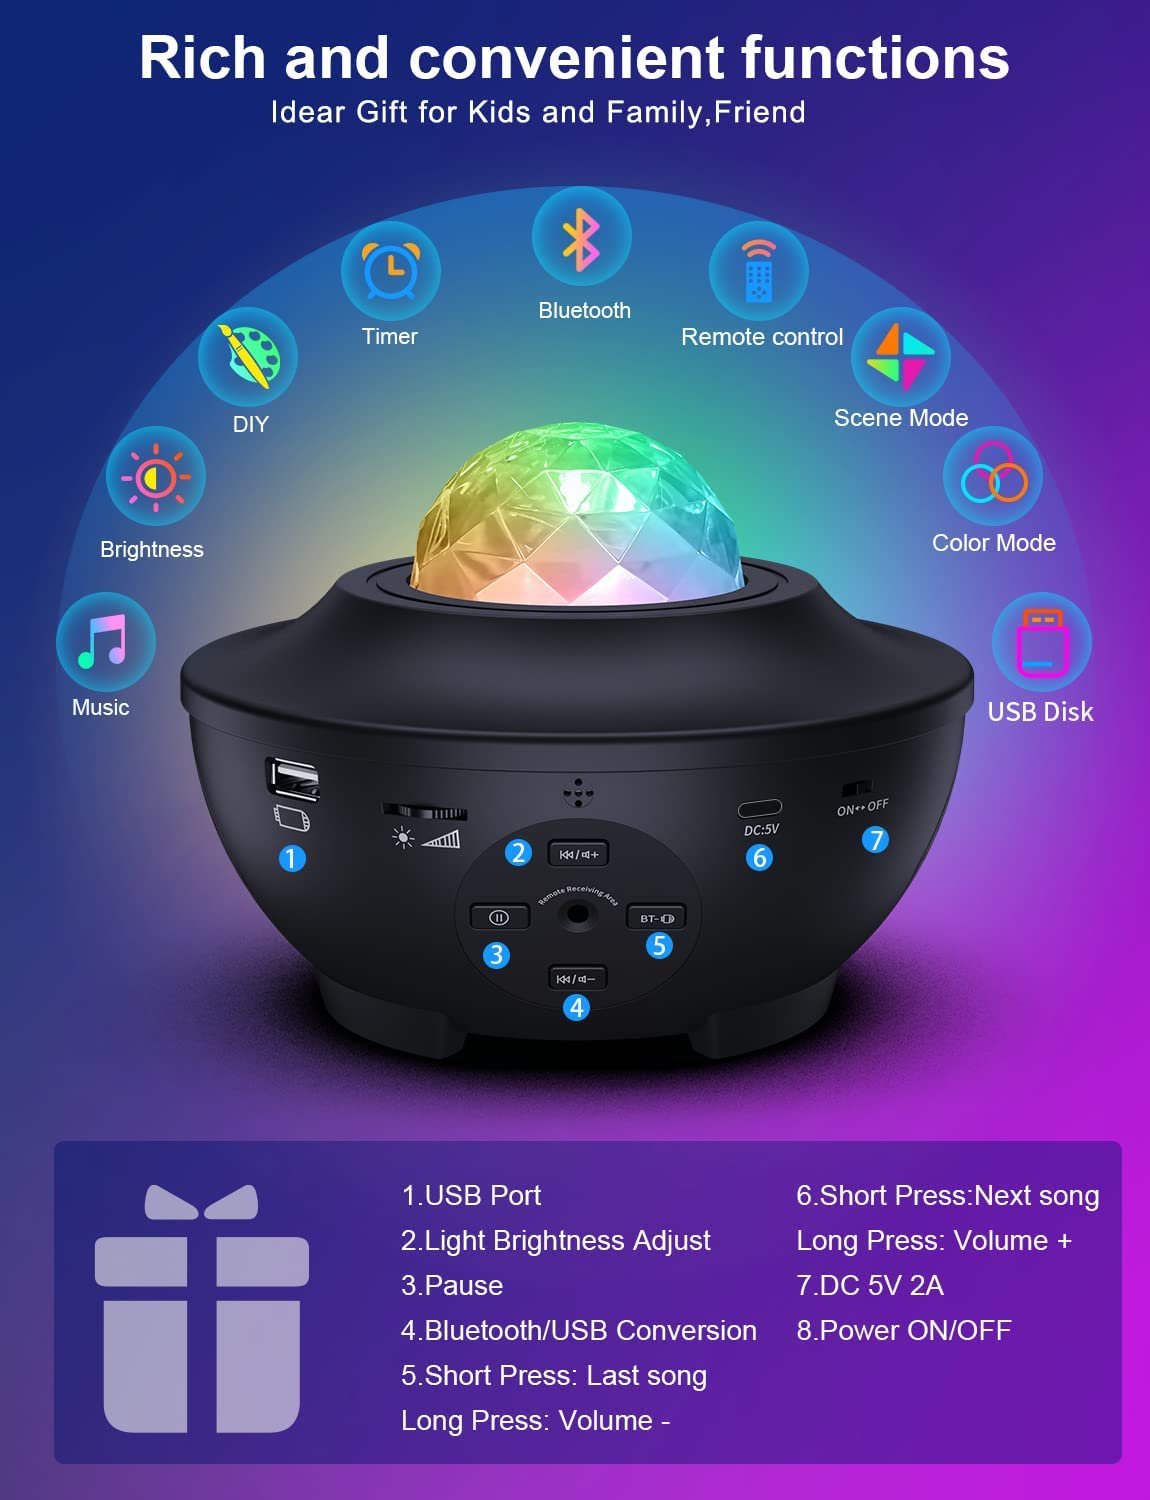 Vibrant Galaxy LED Projector - Bluetooth Music Player